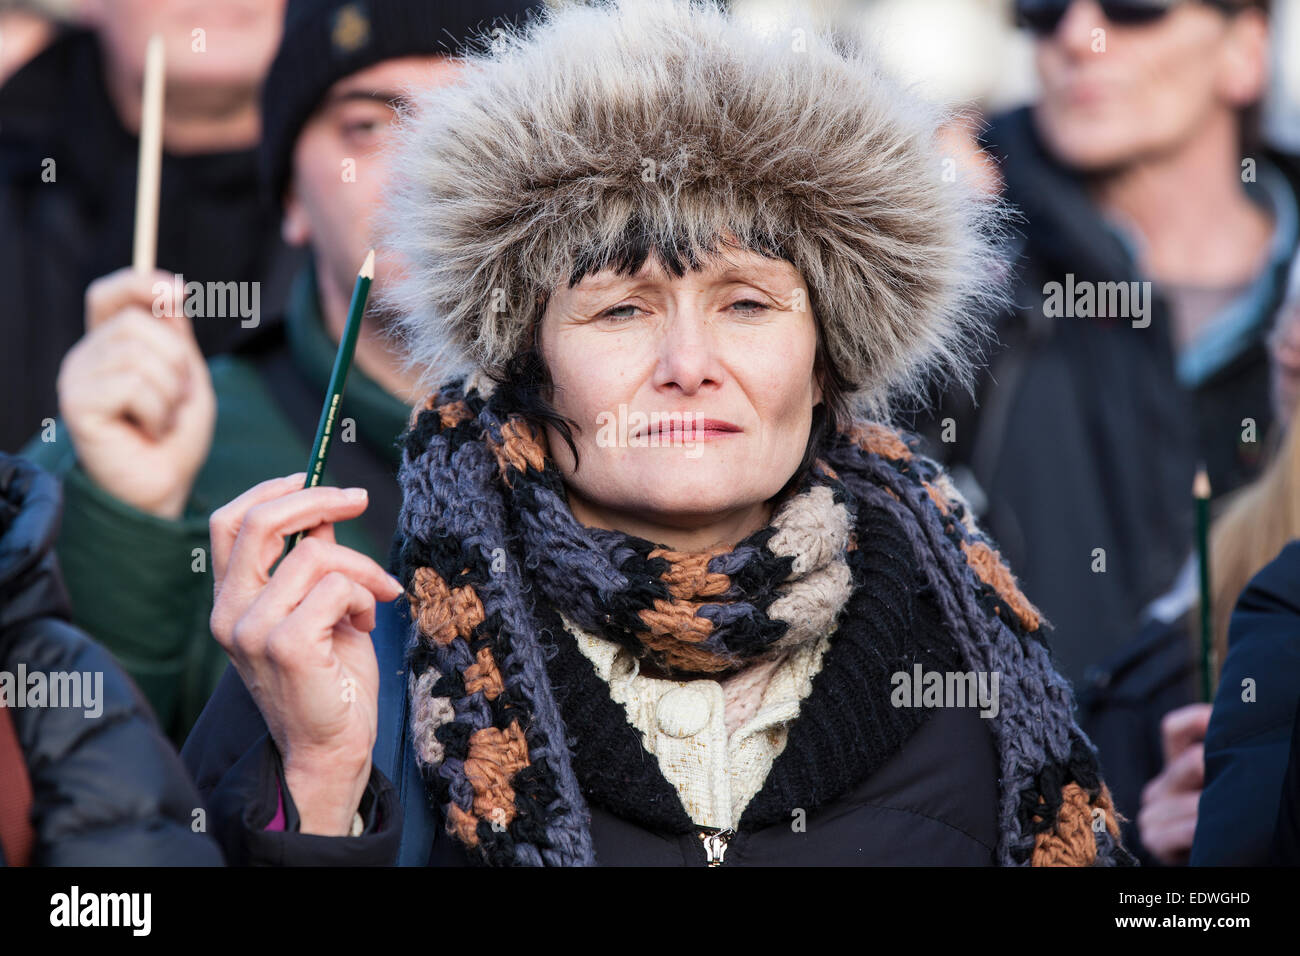 Bristol, UK. 10th January, 2015. Hundreds join a vigil in Bristol City Centre in defence of freedom of speech in the wake of the killing of cartoonists at the offices of the French satirical magazine, Charlie Hebdo.  Bristol, UK. 10th January 2015. Credit:  Redorbital Photography/Alamy Live News Stock Photo